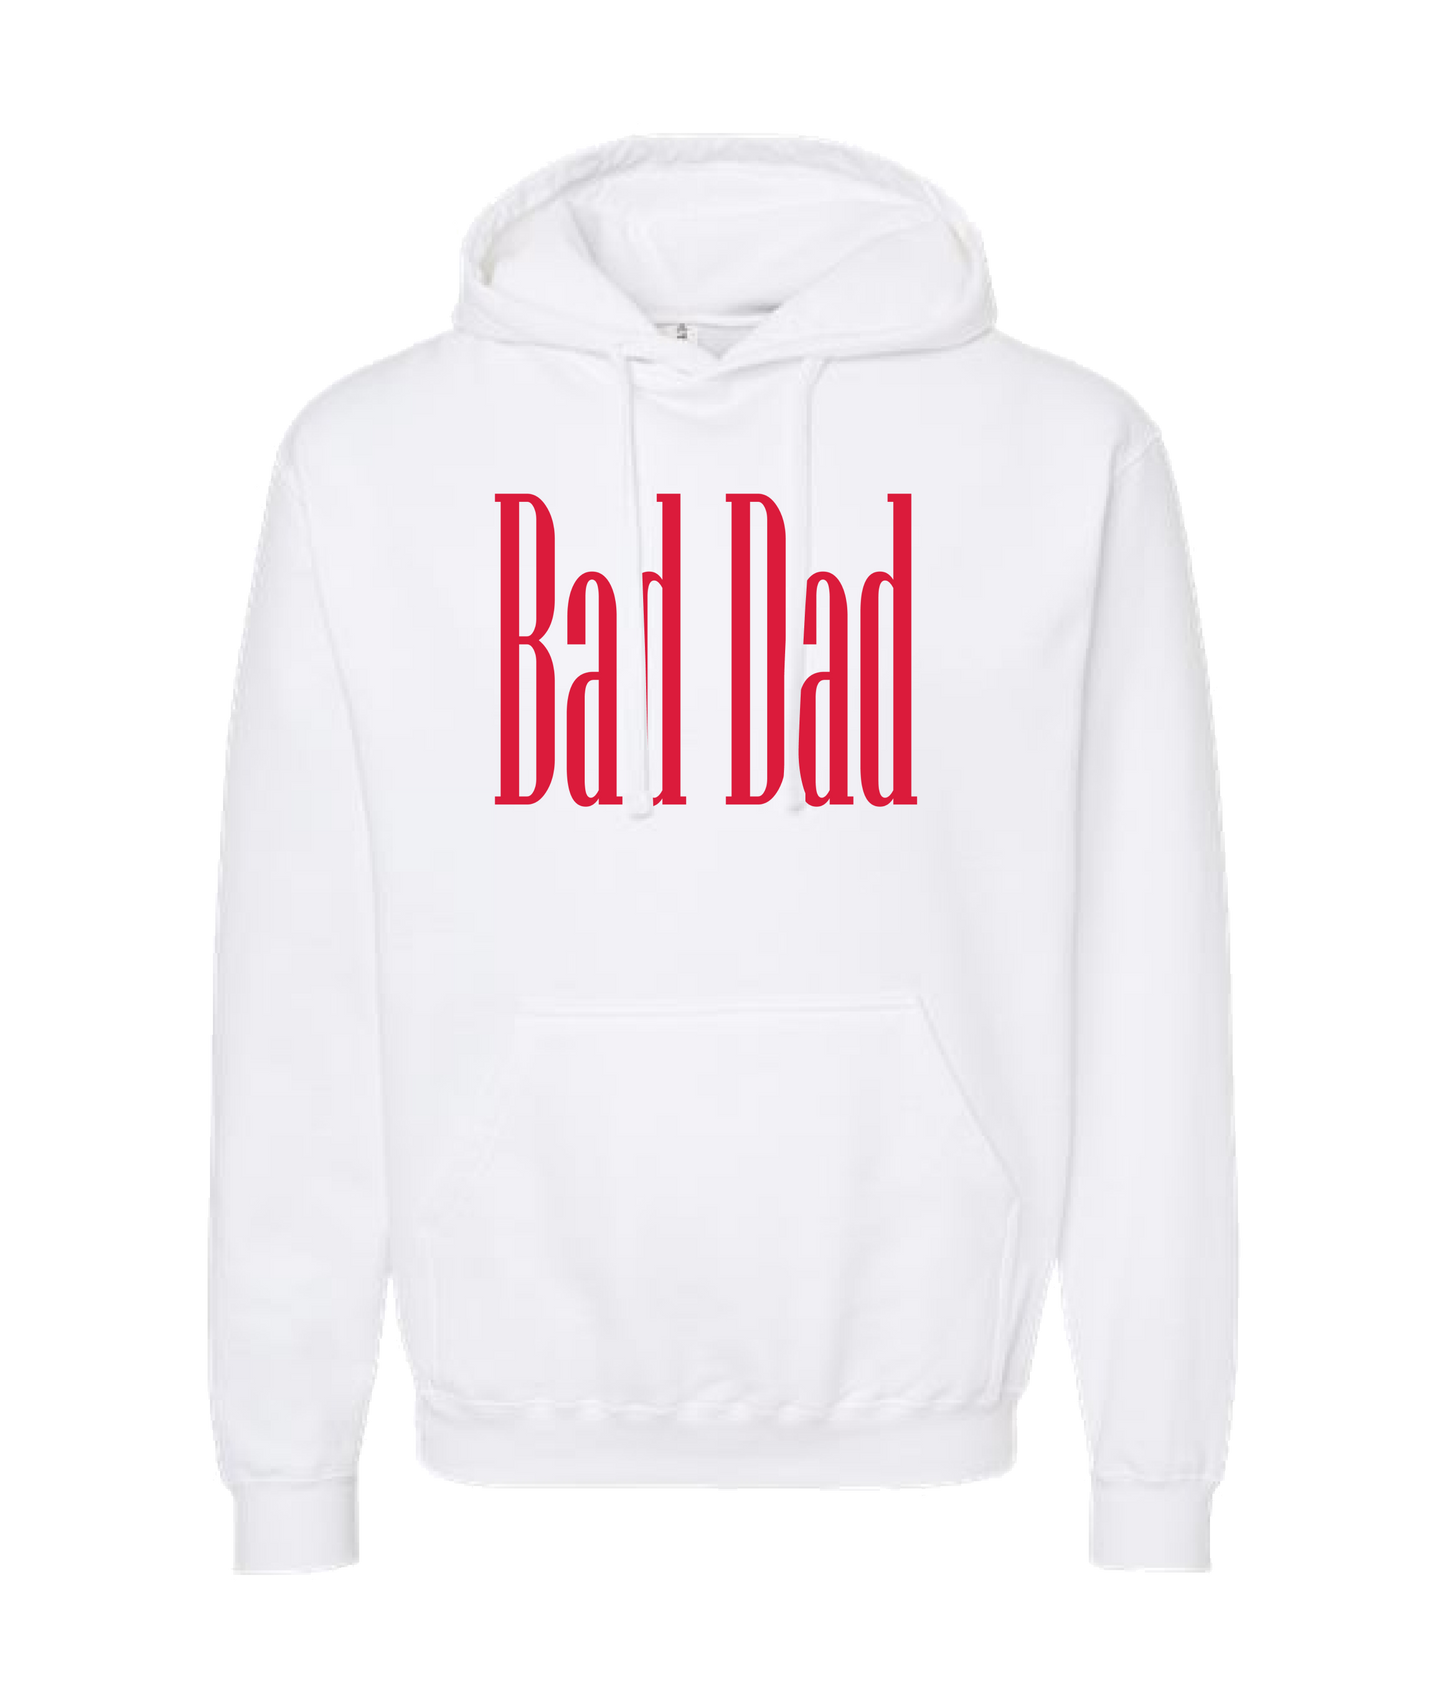 Bad Dad Guitar - Bad Dad Collection - White Hoodie